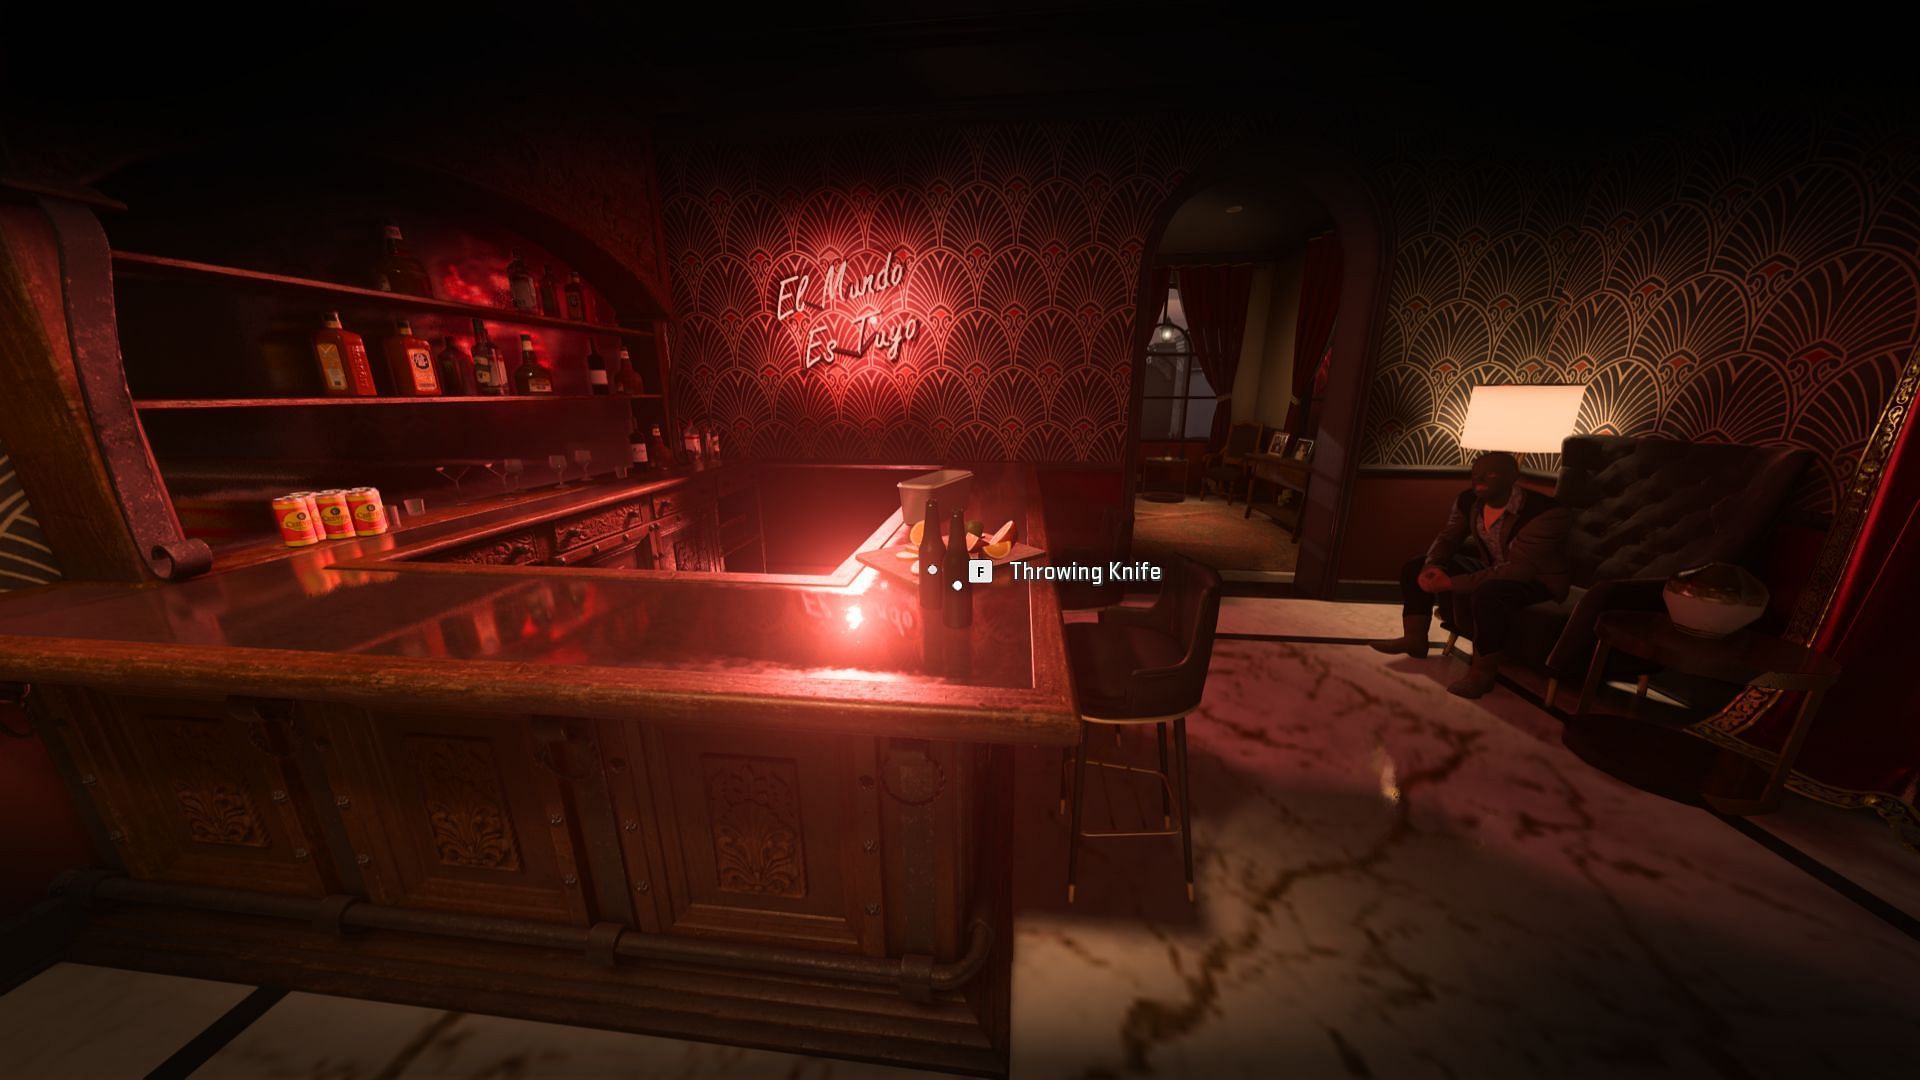 Bottles and a throwing knife in the bar (image via Activision)